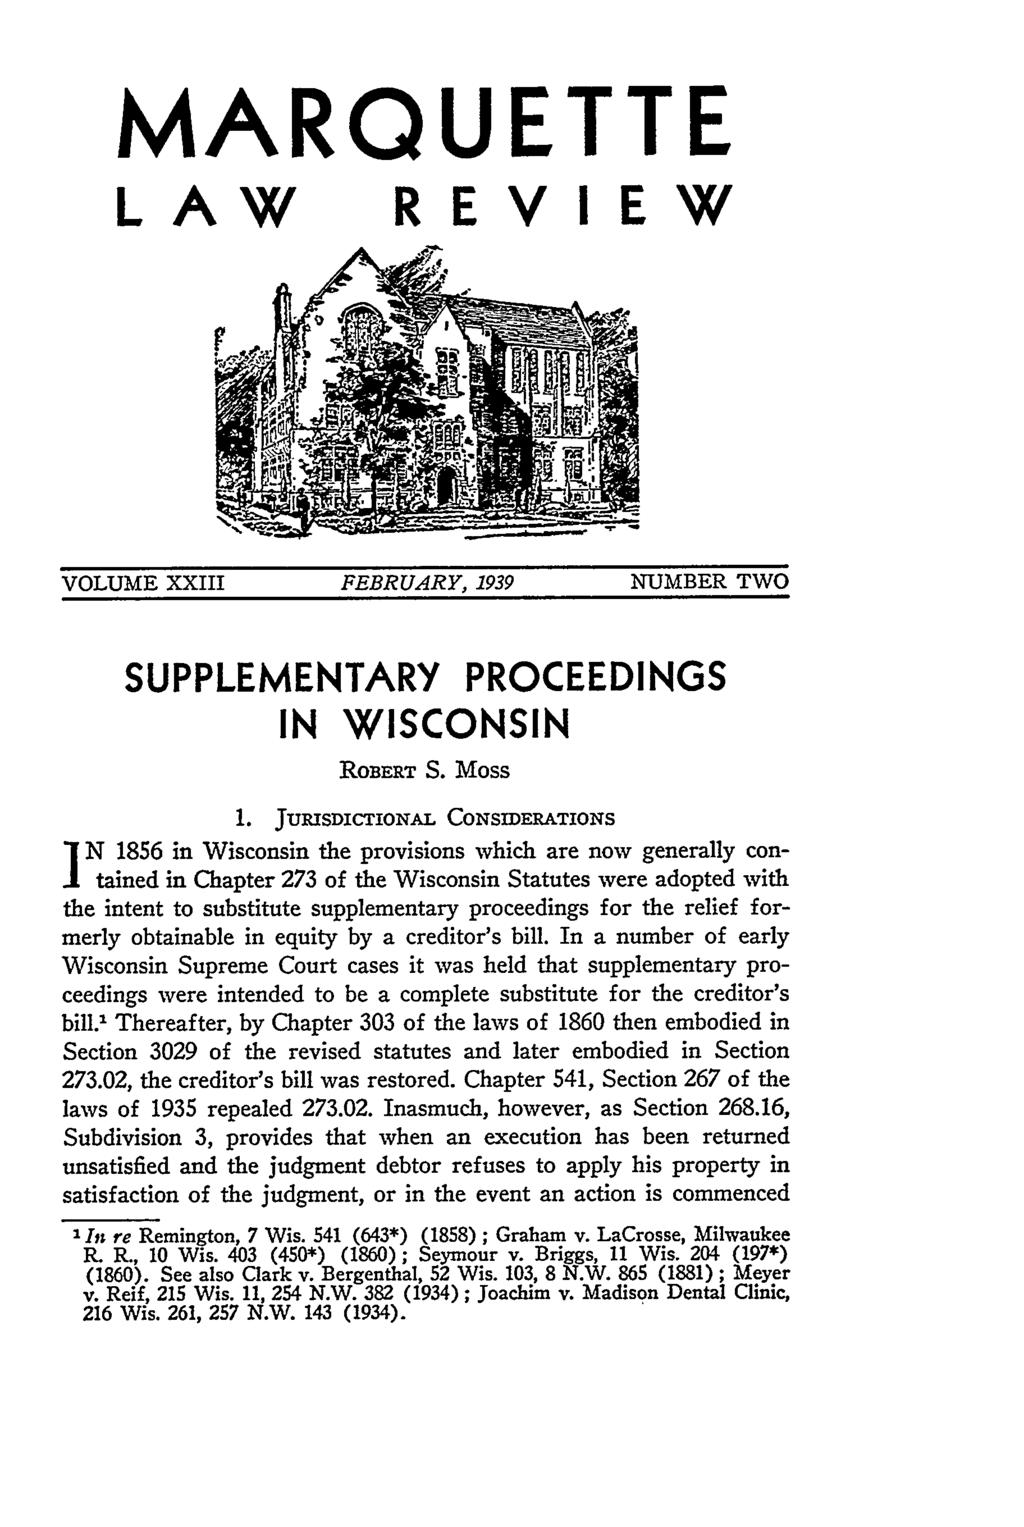 MARQUETTE LAW REVIEW VOLUME XXIII FEBRUARY, 1939 NUMBER TWO SUPPLEMENTARY PROCEEDINGS IN WISCONSIN RoBERT S. Moss 1.